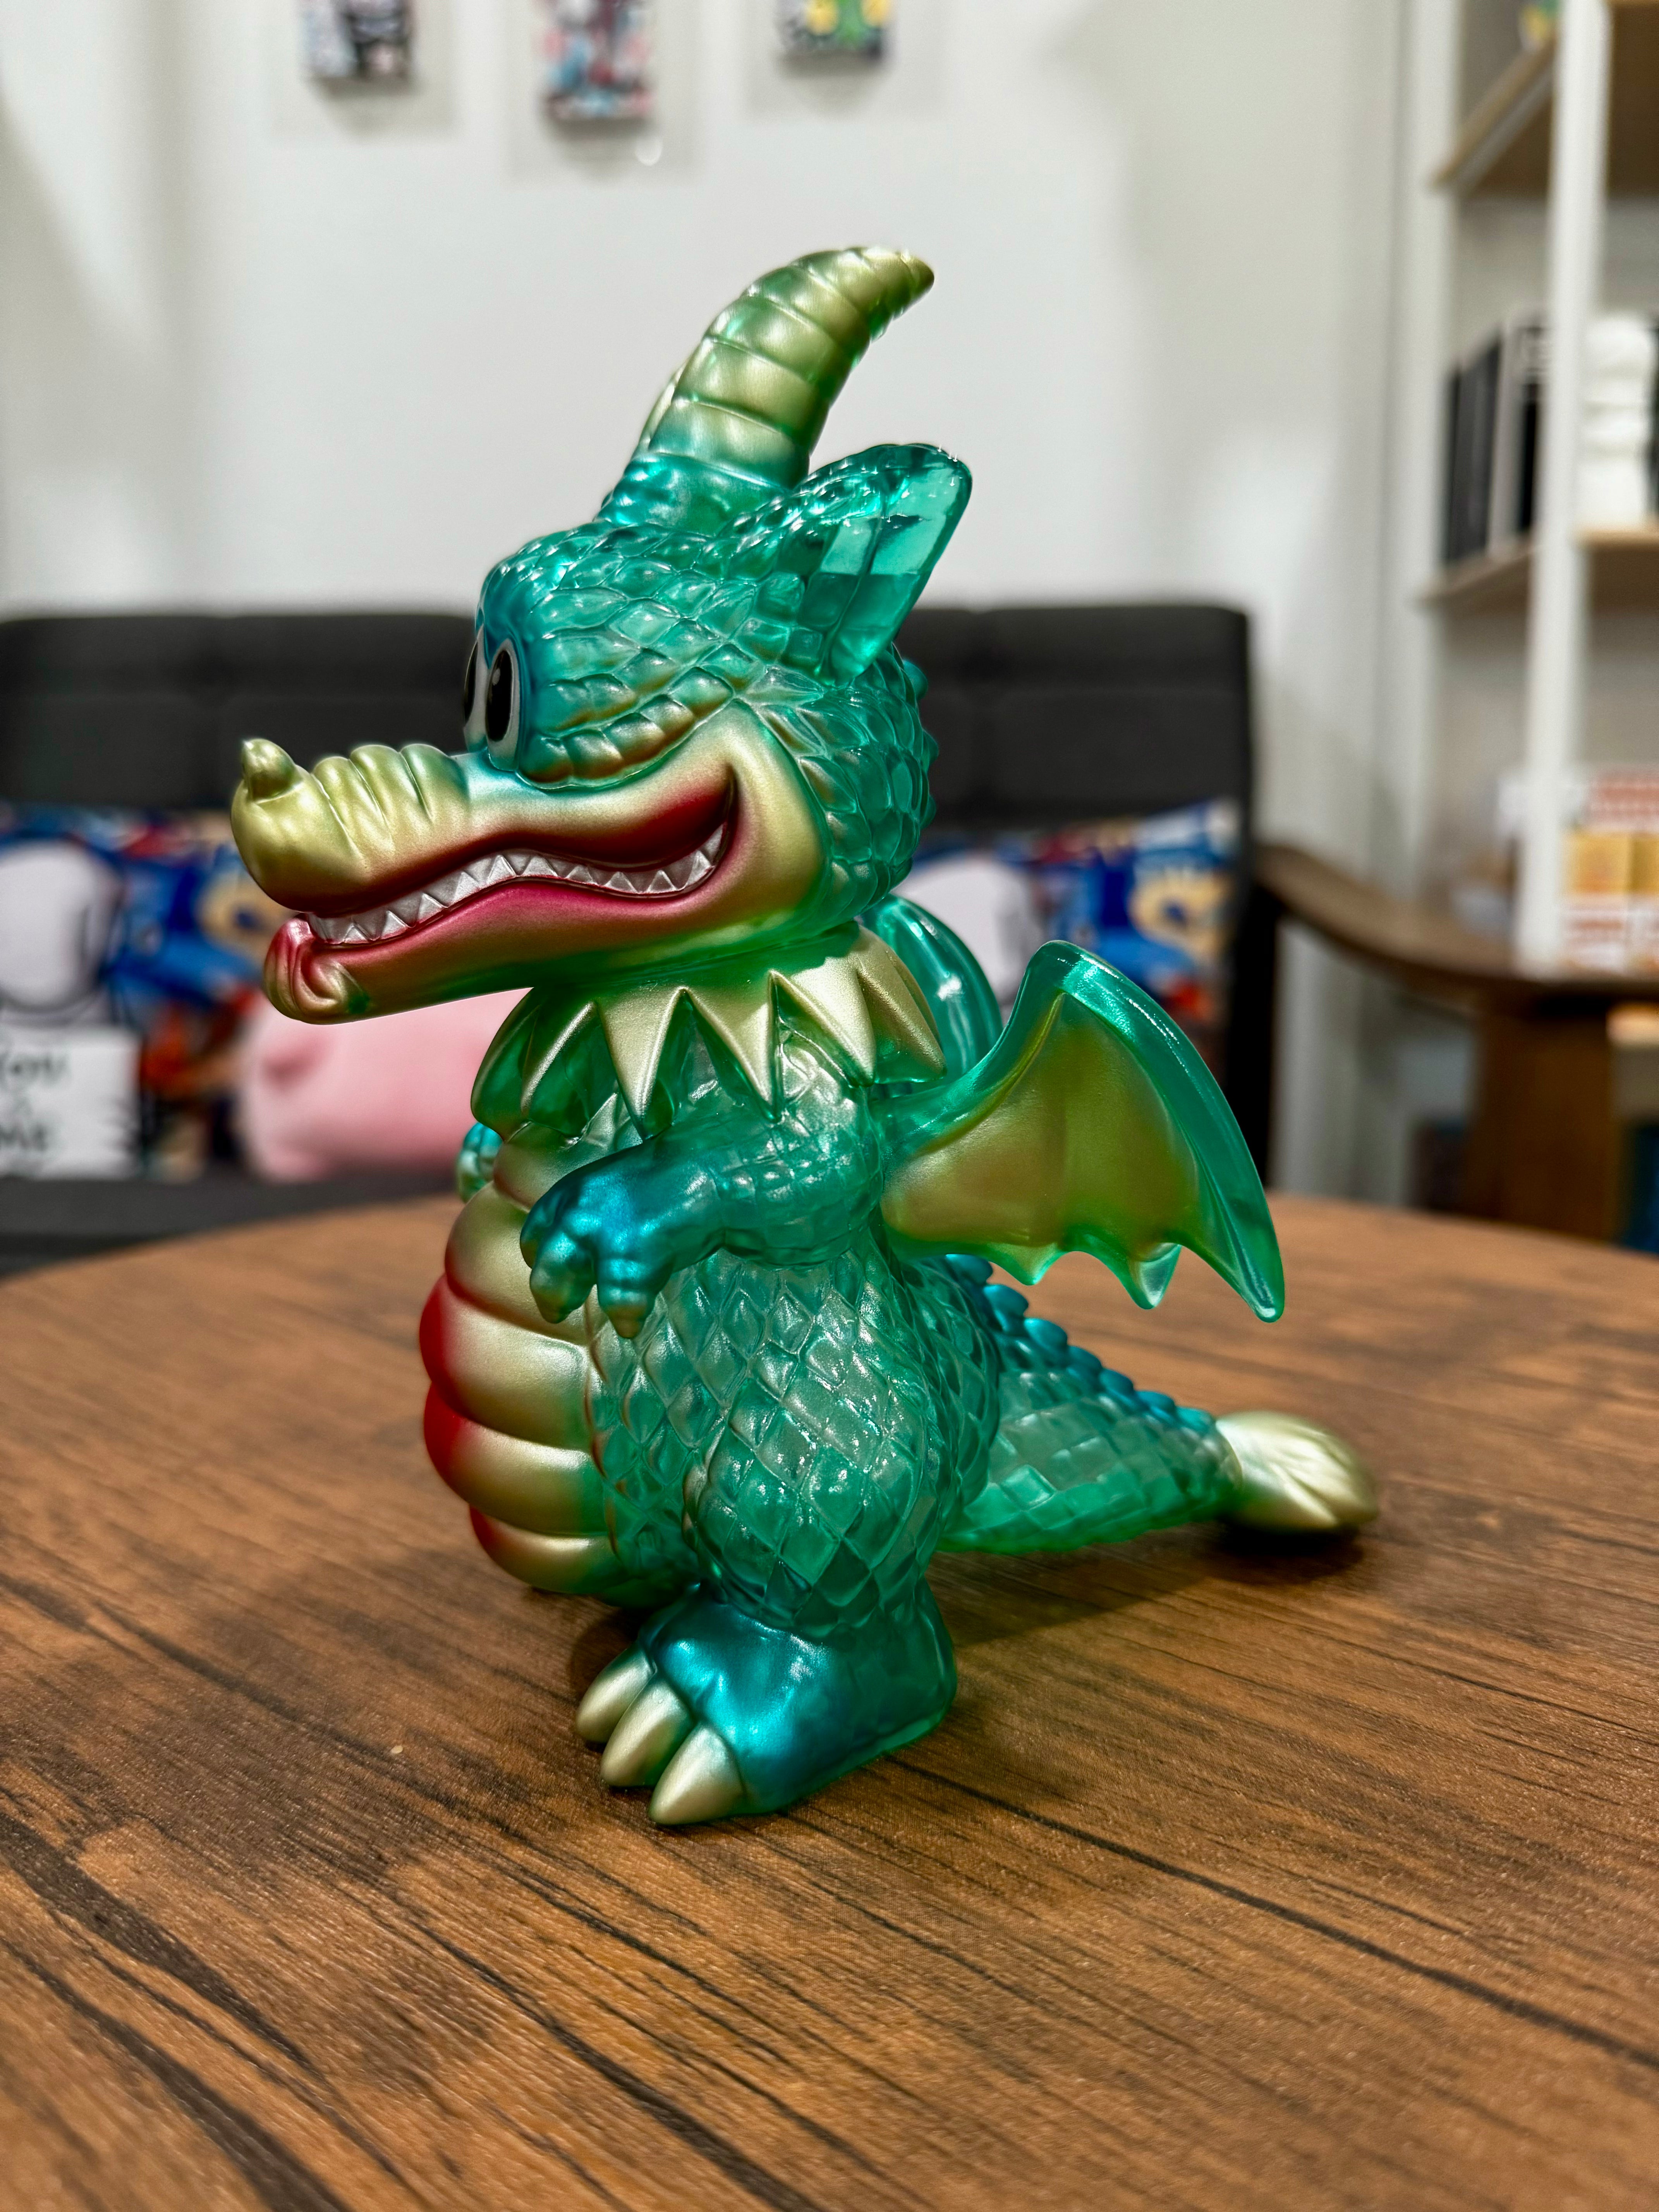 A serene Sofubi dragon figurine titled Calm Dragon Clear Mint by Art Junkie on a wooden surface. From Strangecat Toys, a blind box and art toy store.